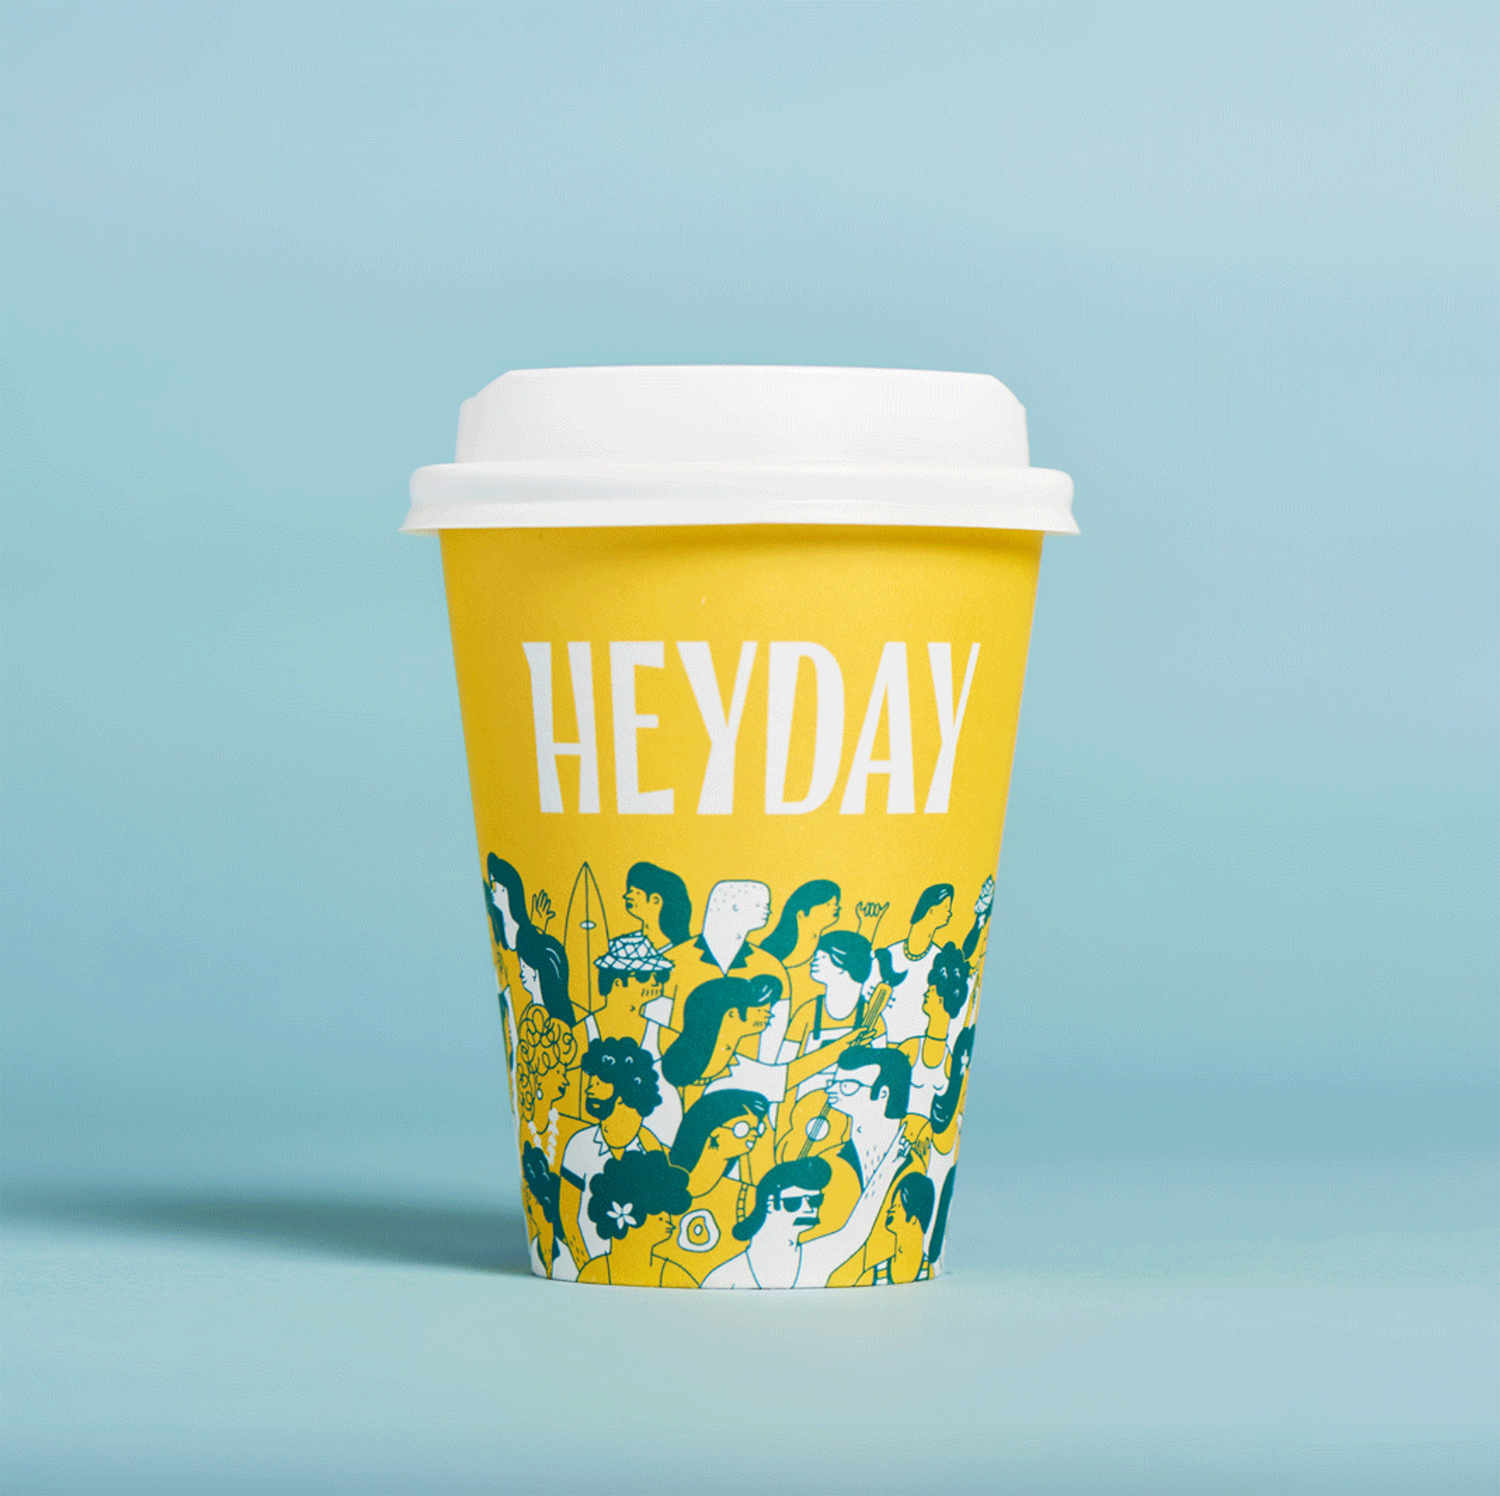 30 Coffee Cup Ideas To Brighten Your Day